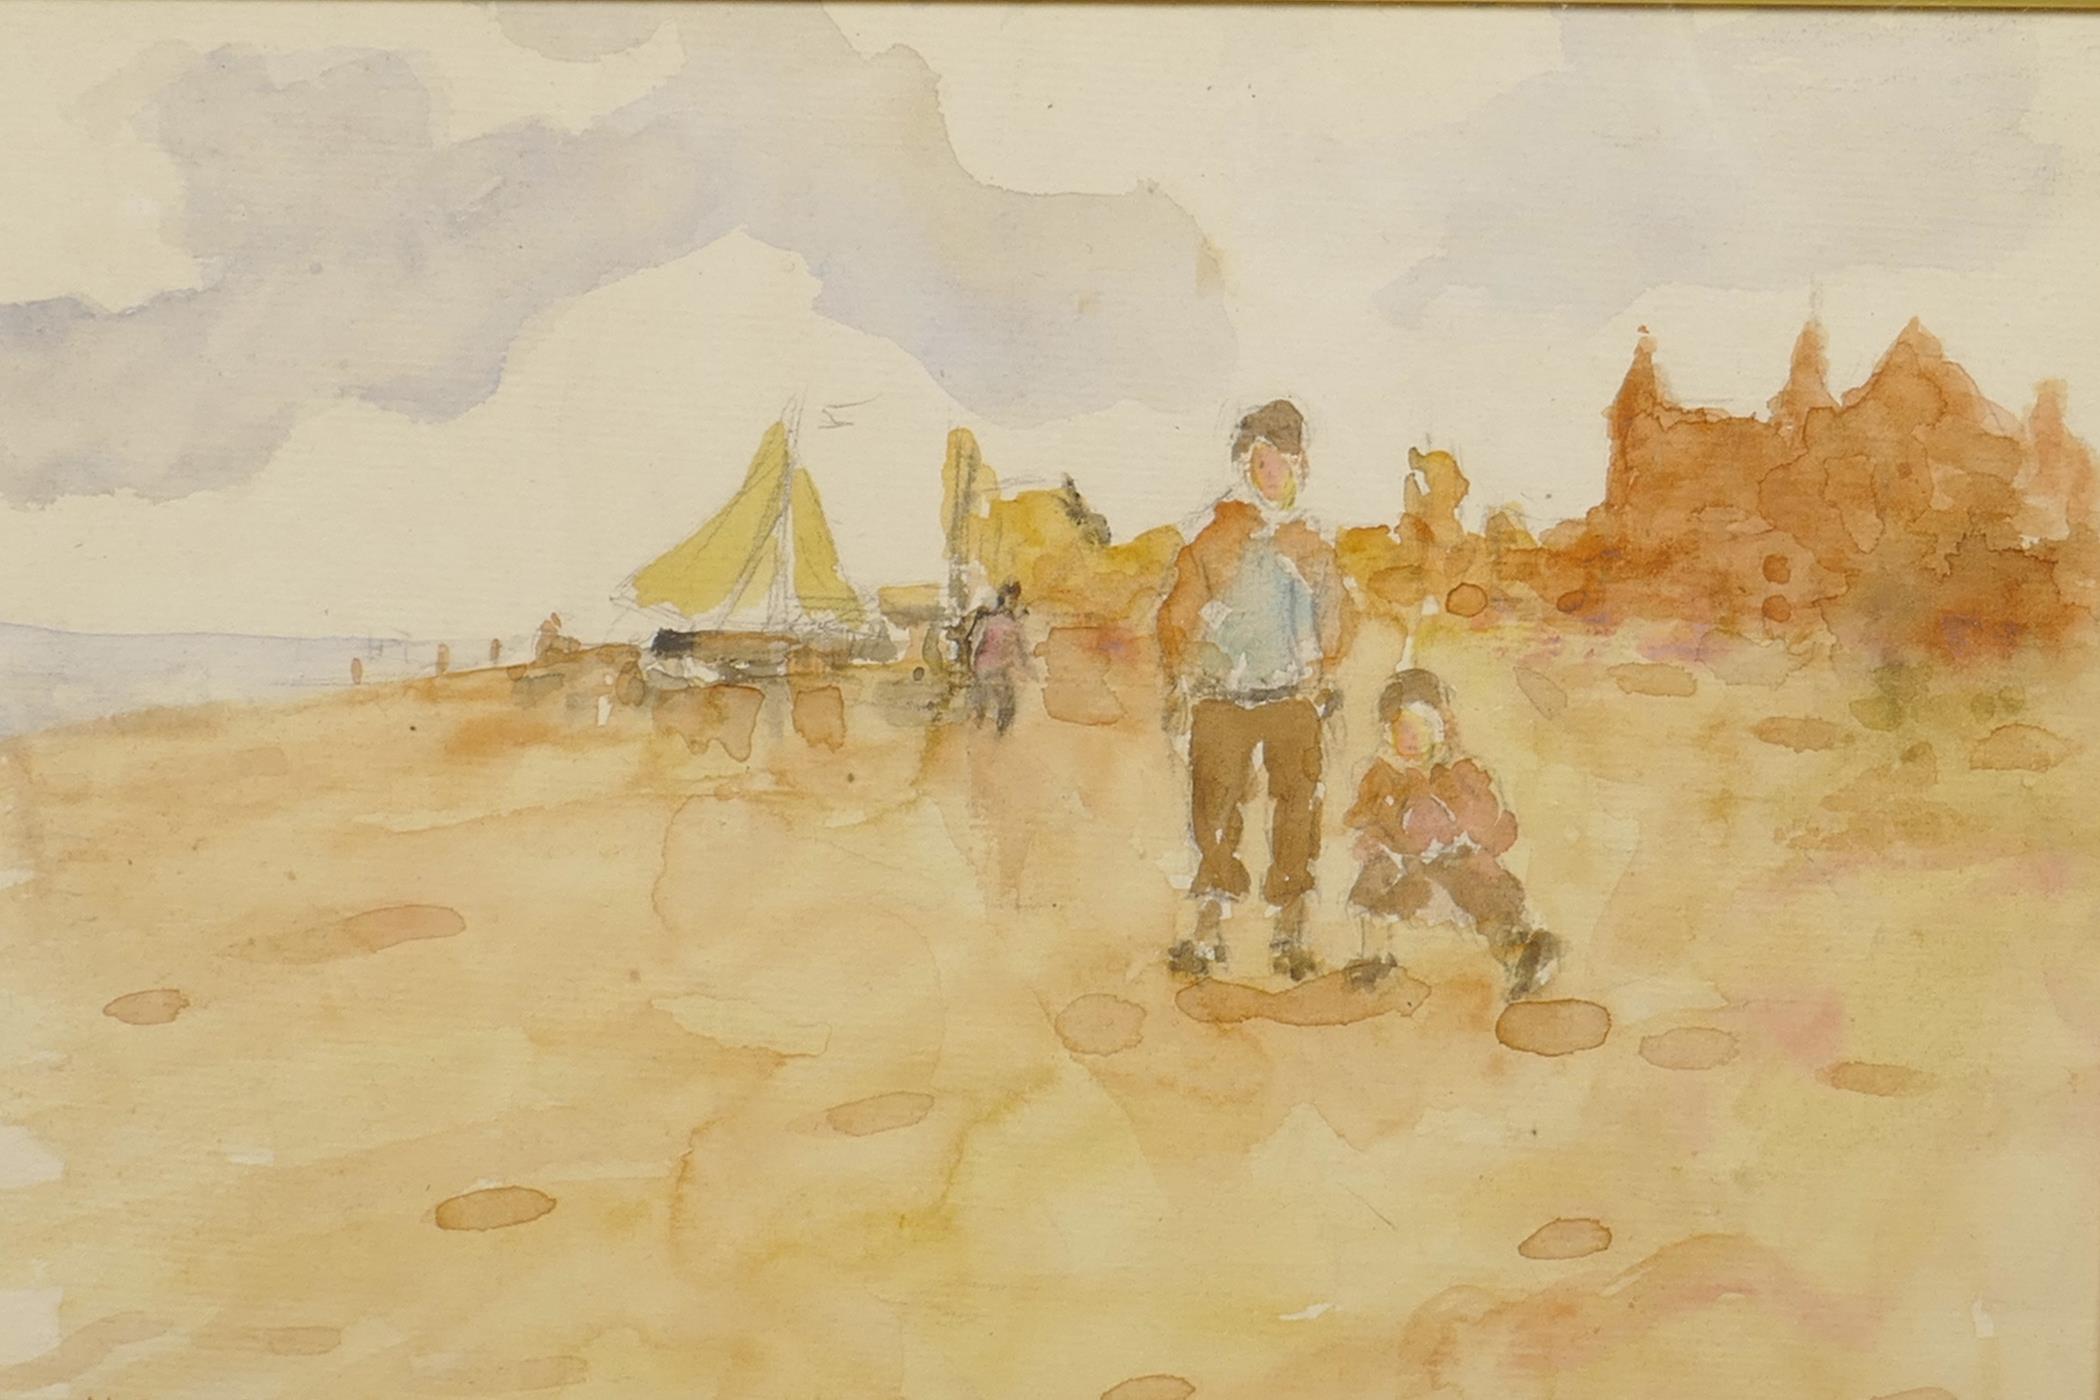 V. De Windt, beach scene with fishing boats and children to foreground, signed, watercolour, 7" x